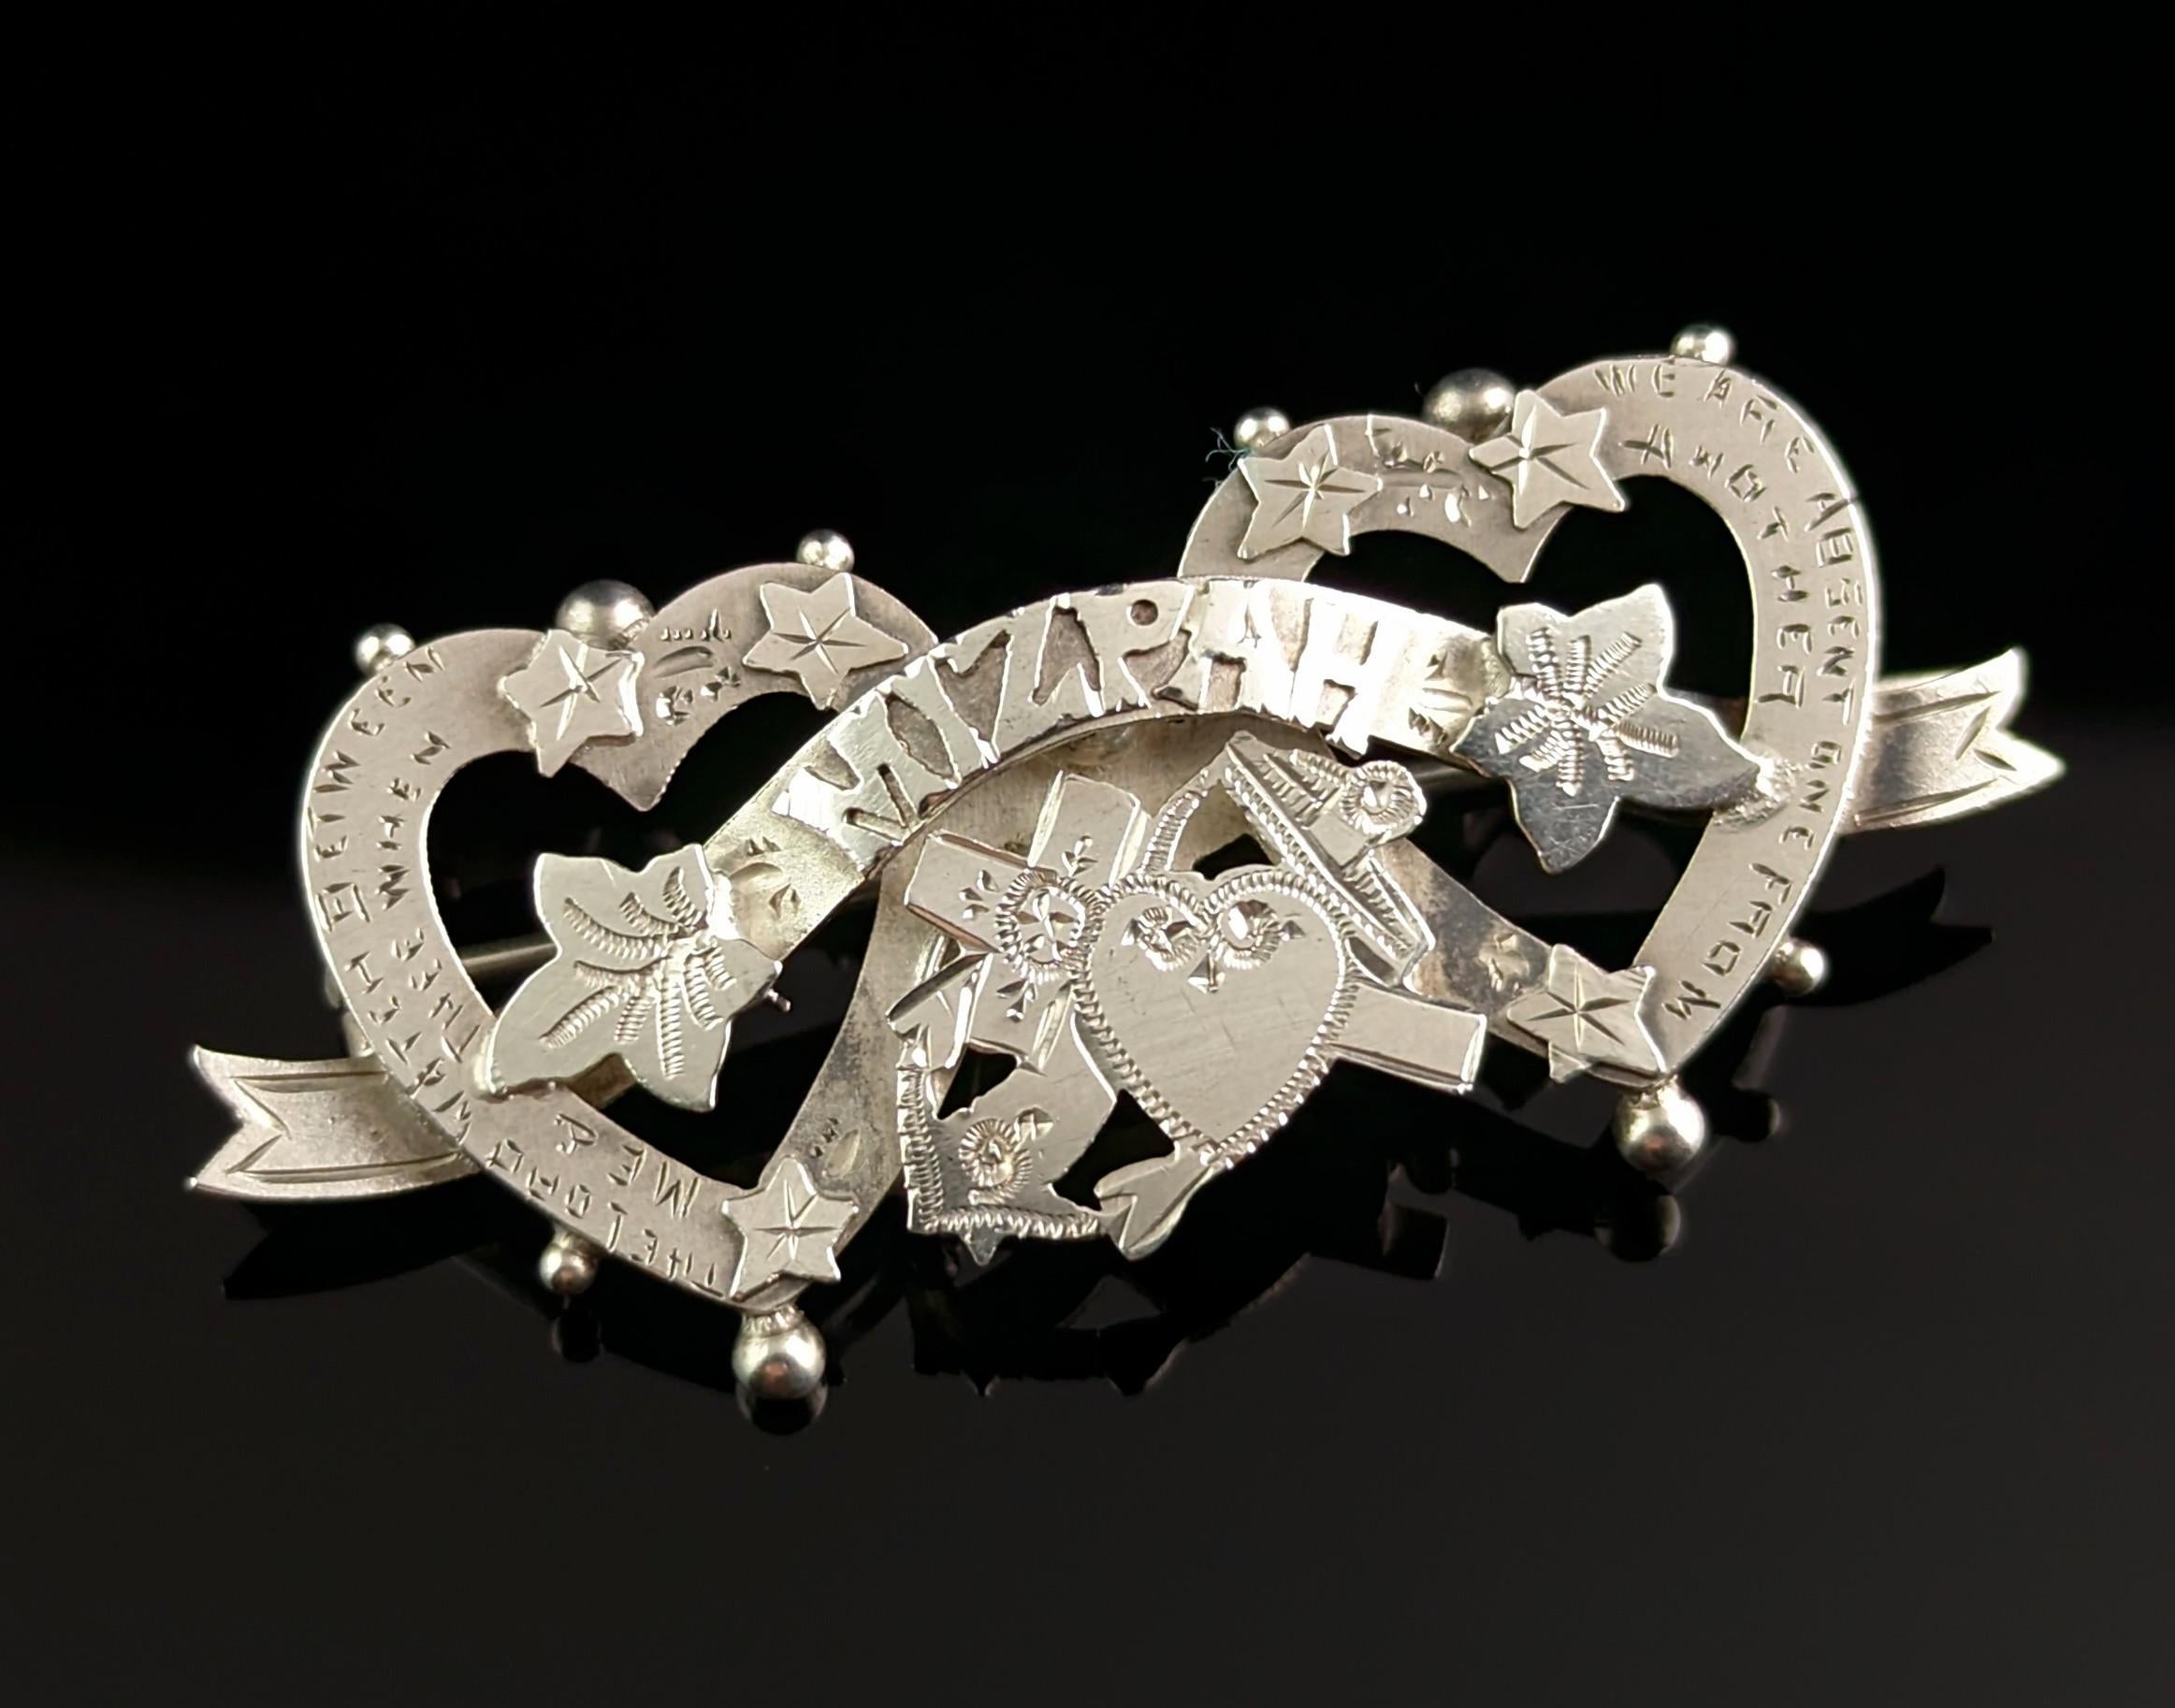 A beautiful antique, late Edwardian era sterling silver Mizpah brooch.

This brooch is so chocked full of sentiment with something new speaking out every time you look at it.

It is a double entwined heart brooch with the sentimental Mizpah to the